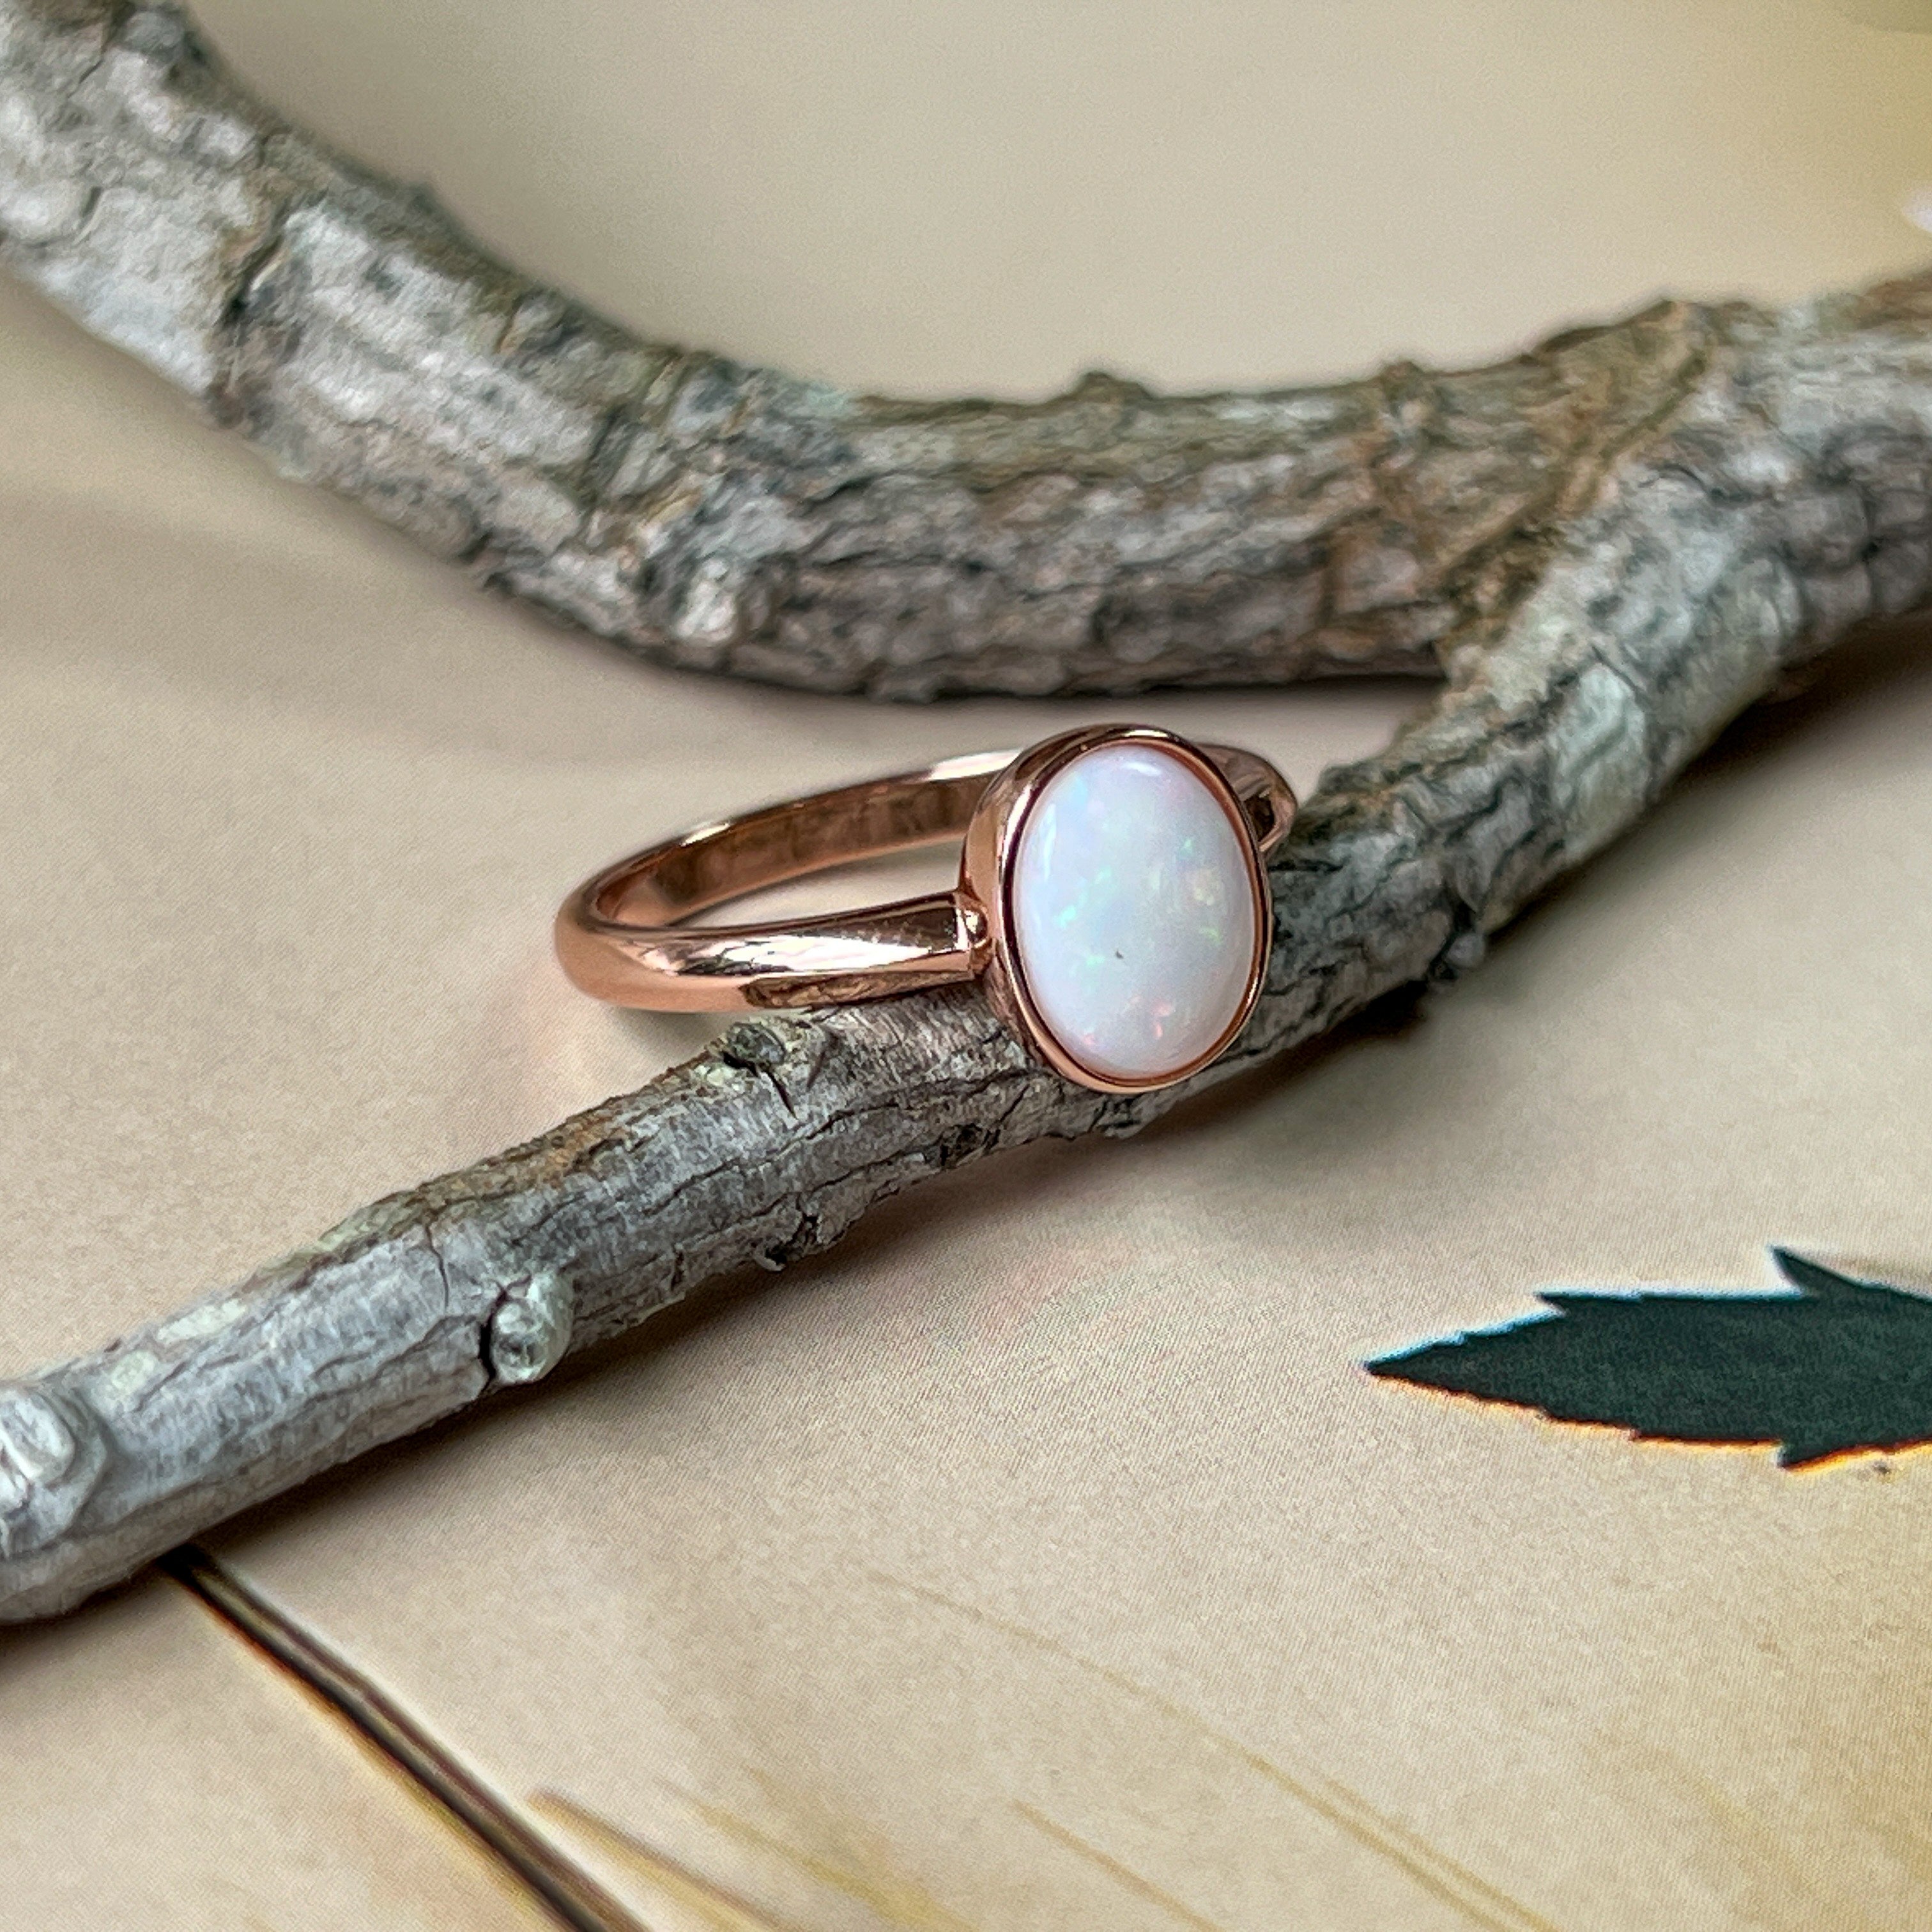 Bezel-Set Solitaire White Opal Ring - 10x8mm, Rose Gold-Plated Sterling Silver, Elegant Minimalist Jewelry, Perfect Gift for Her - Masterpiece Jewellery Opal & Gems Sydney Australia | Online Shop